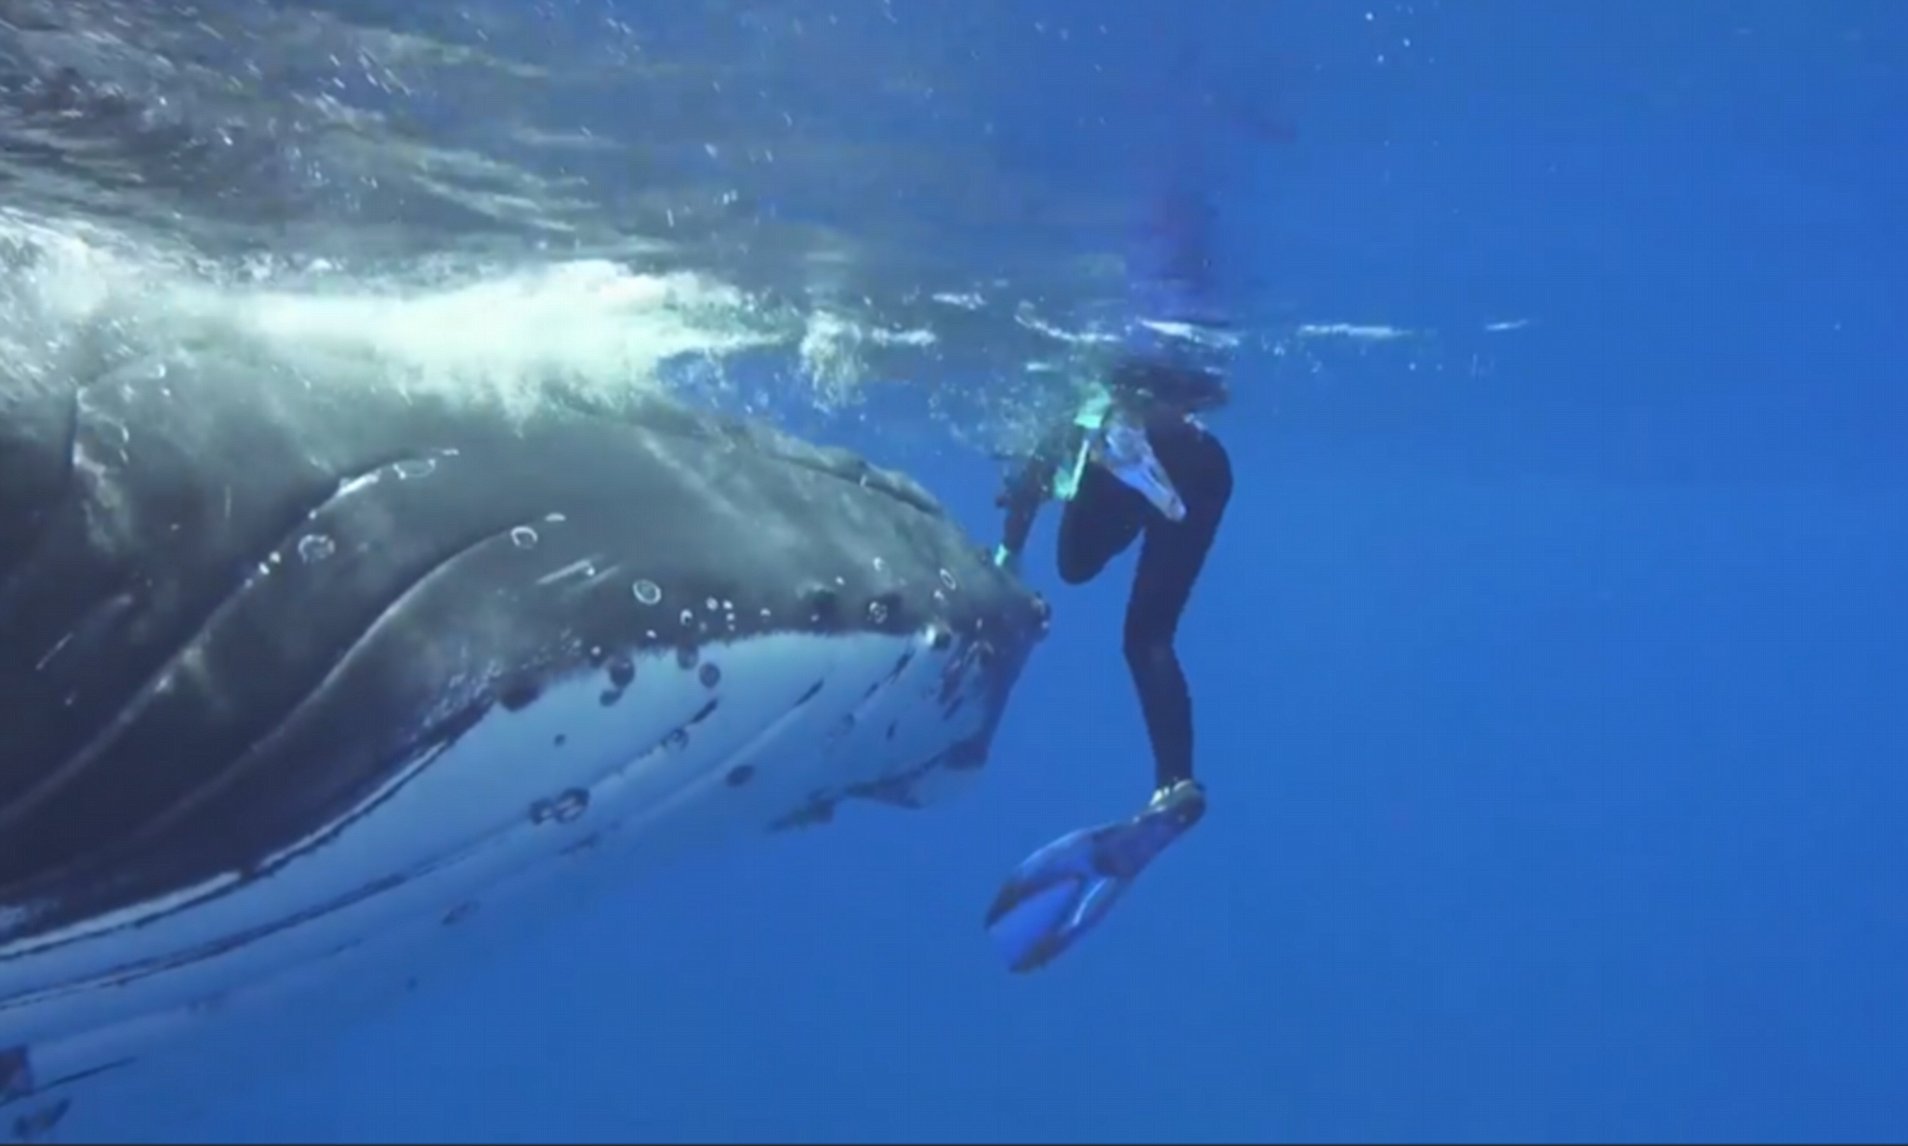 The remarkable aspect of the footage is that the whale instinctively protected the biologist and warned her of danger.